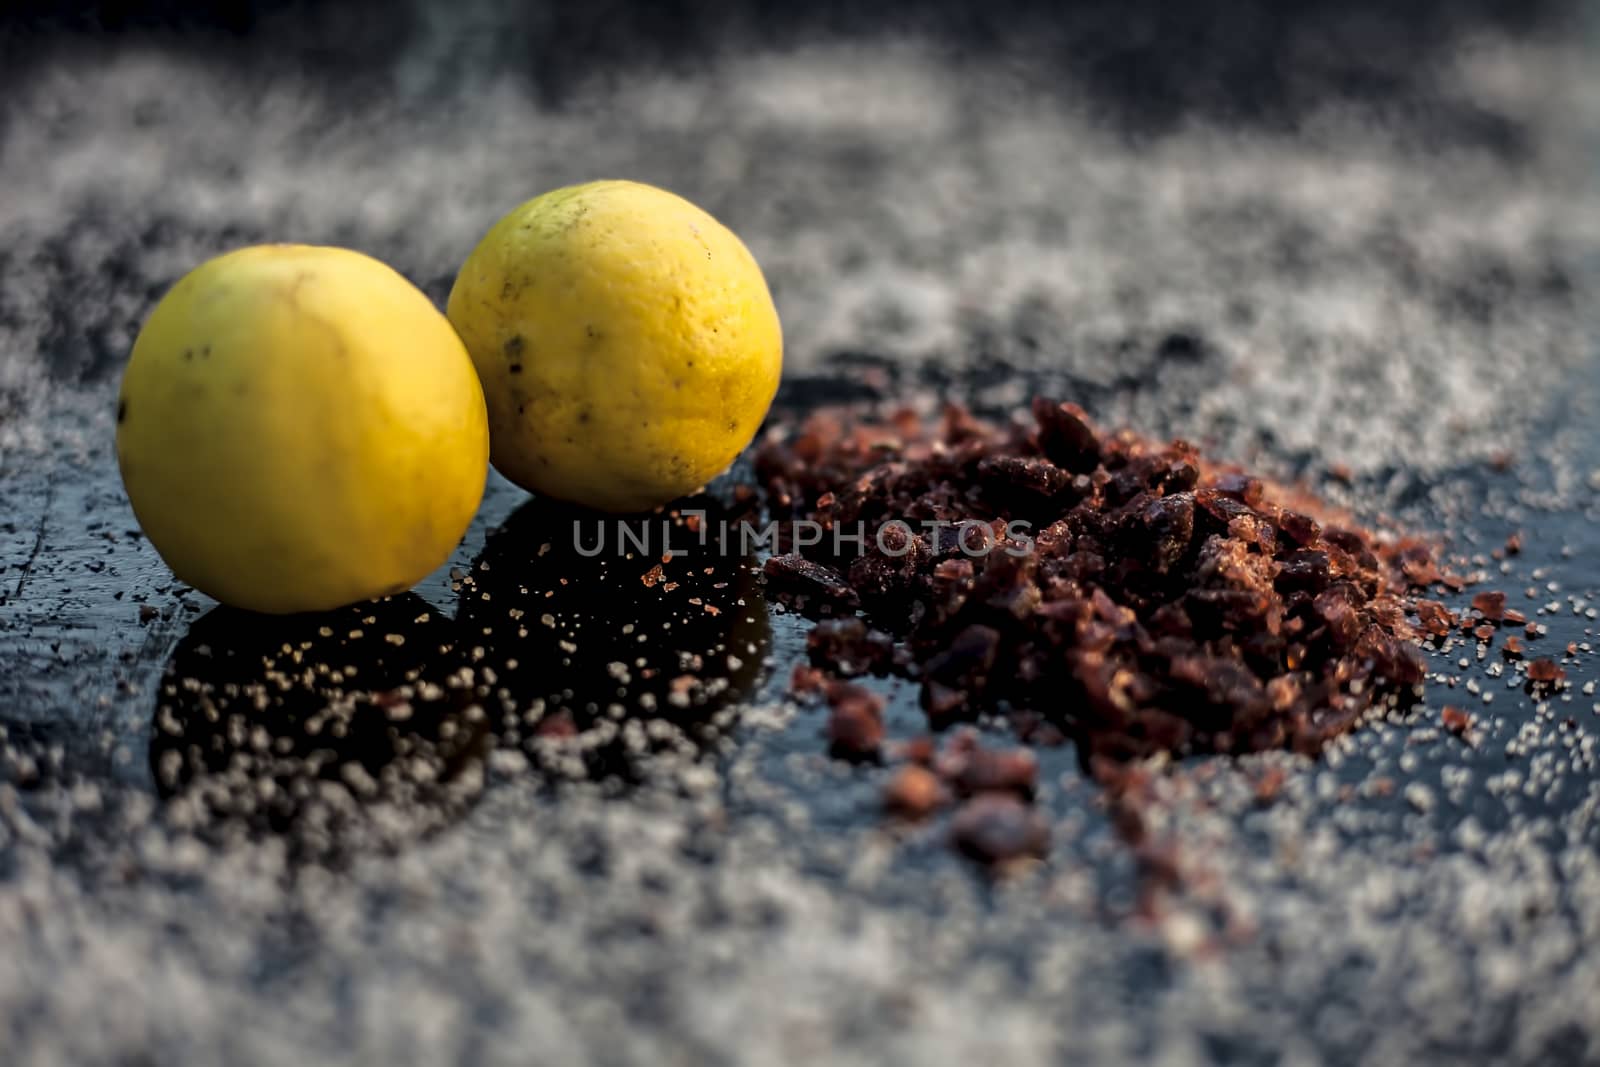 Pair of raw organic ripe yellow lemons on a black surface along with some rock salt (sendha namak) and white or common salt spread on the surface. Used for the salt remedy of skin and as a face mask. by mirzamlk